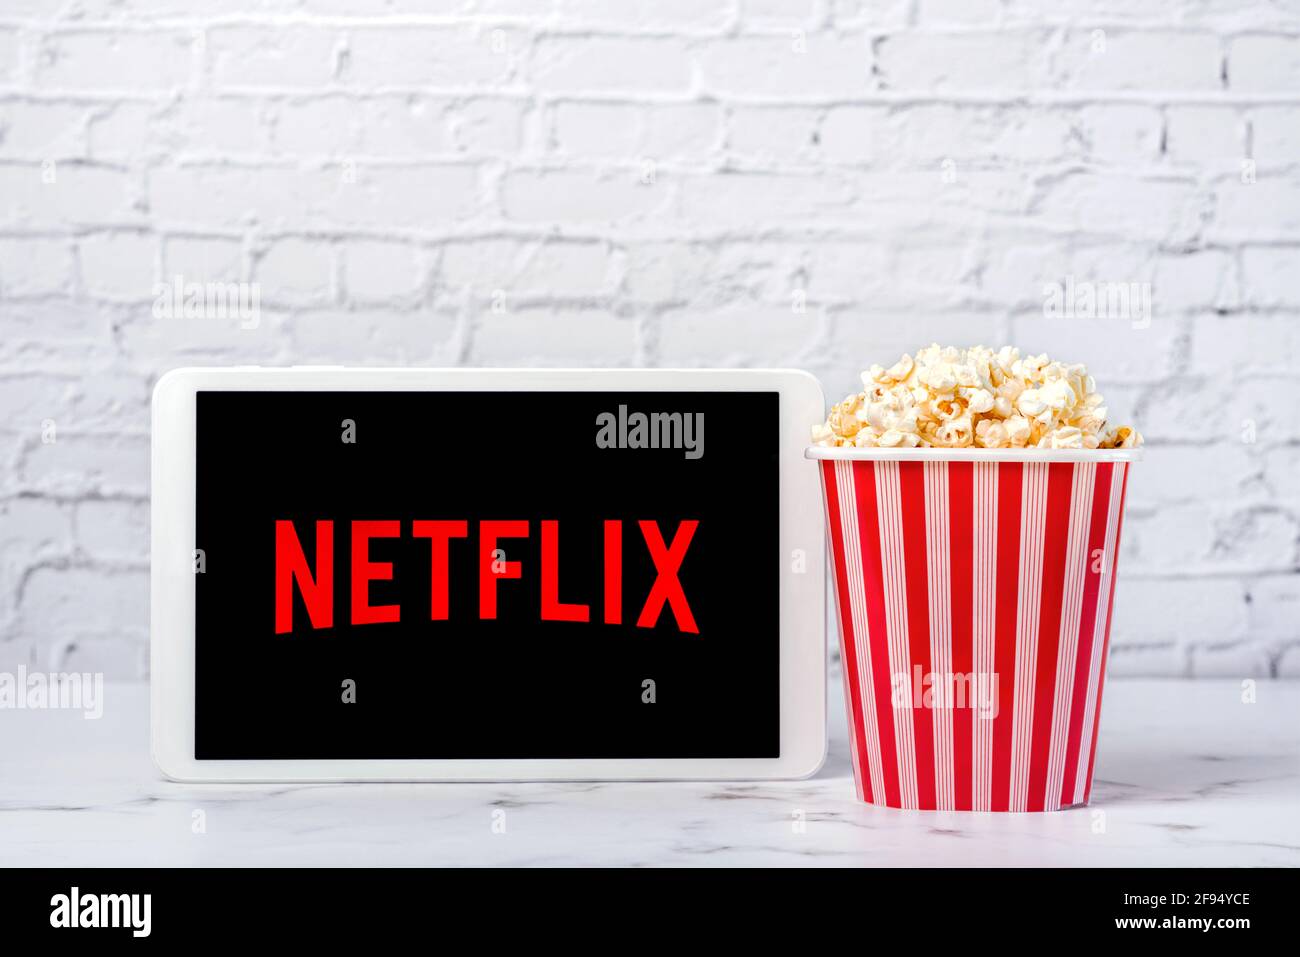 Netflix logo on the screen of a white digital tablet with popcorn against on a white bricks background Stock Photo